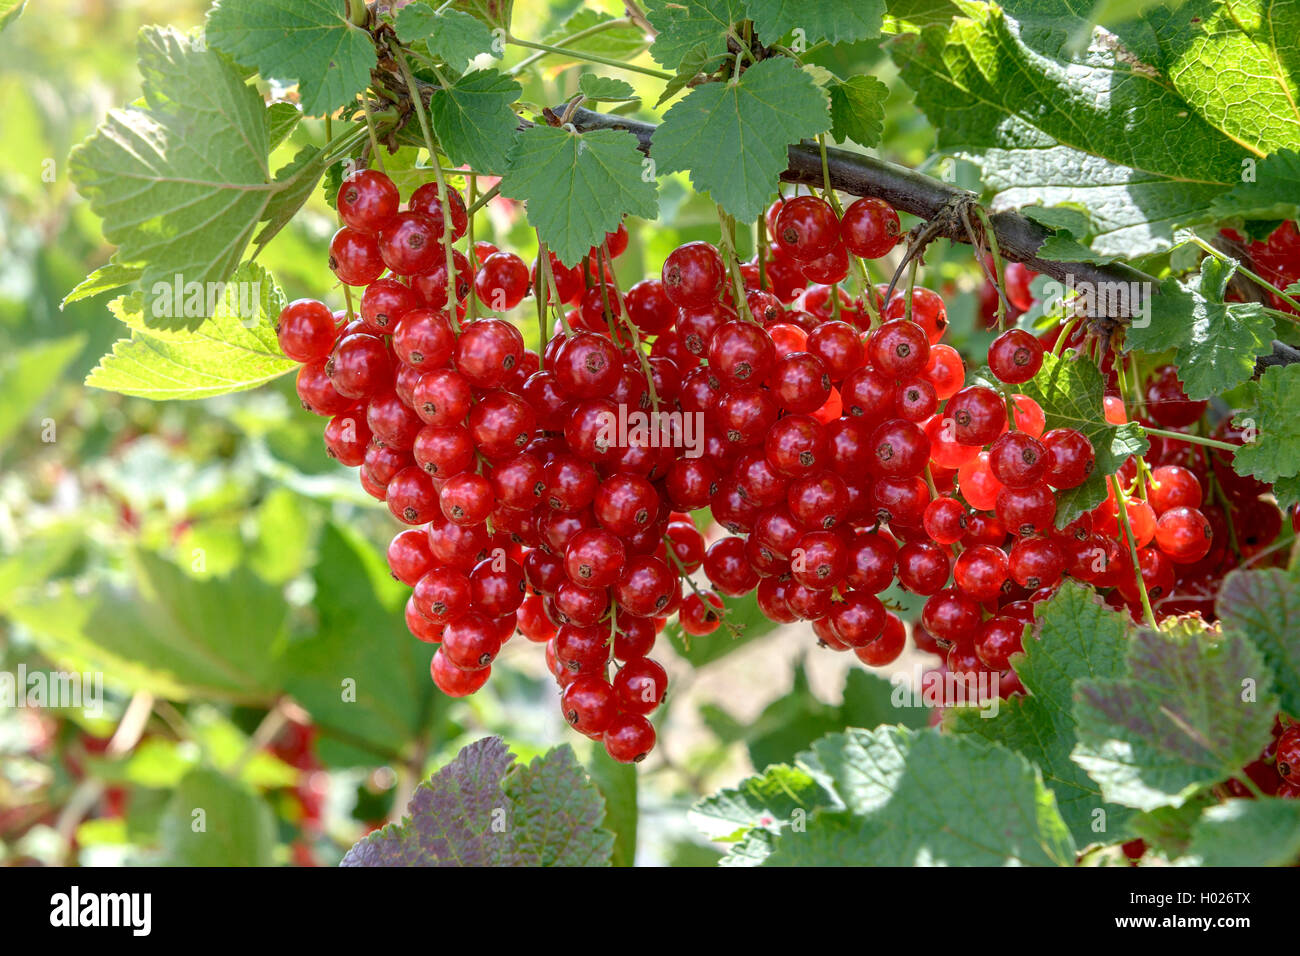 northern red currant (Ribes rubrum 'Rolan', Ribes rubrum Rolan), cultivar Rolan Stock Photo